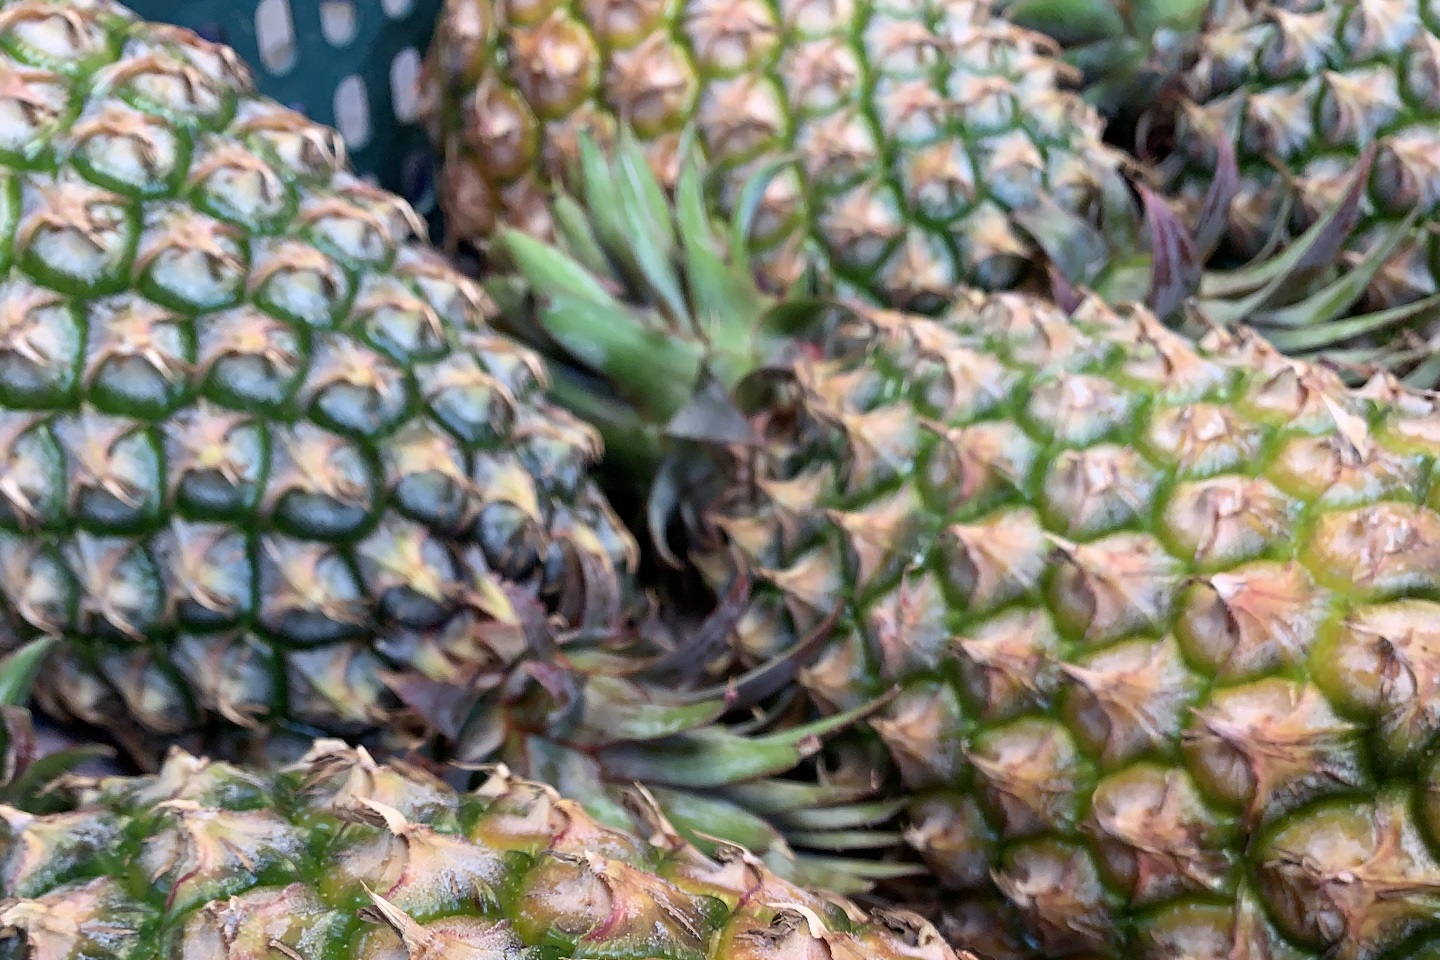 Floaters bye bye! Taiwan study: Eating pineapples reduces symptoms by 70%